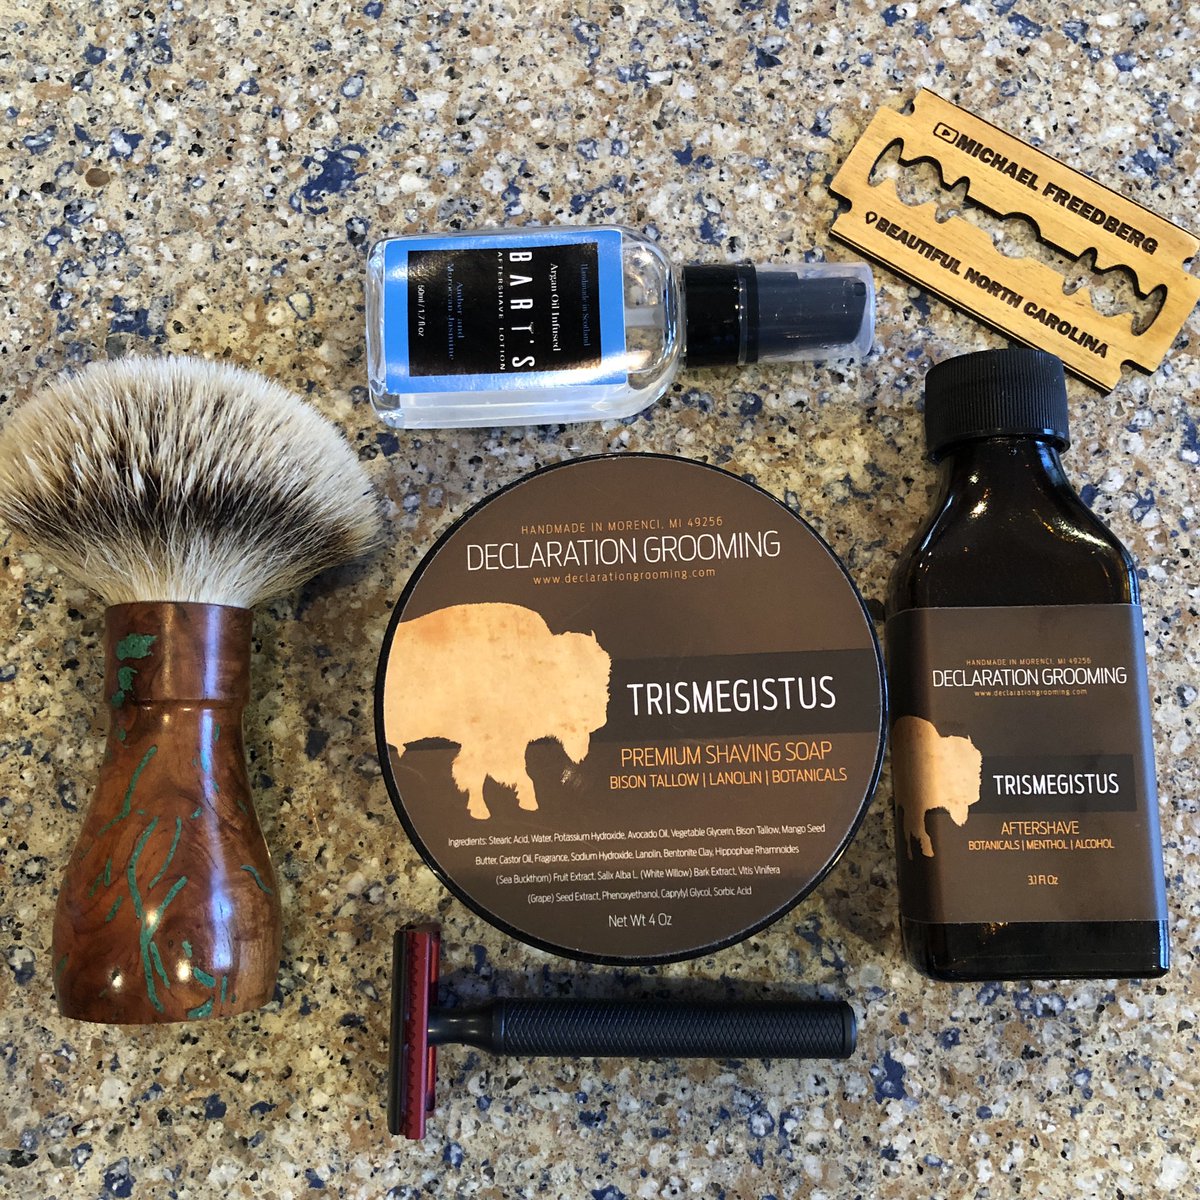 Come join me for a live shave today, Sunday 27 Dec 2020 @ 2pm EST (UTC-5)! You can tell me all about your new shaving goodies and make me jealous. @mantic59 #wetshaving #shaving #YouTubeLive